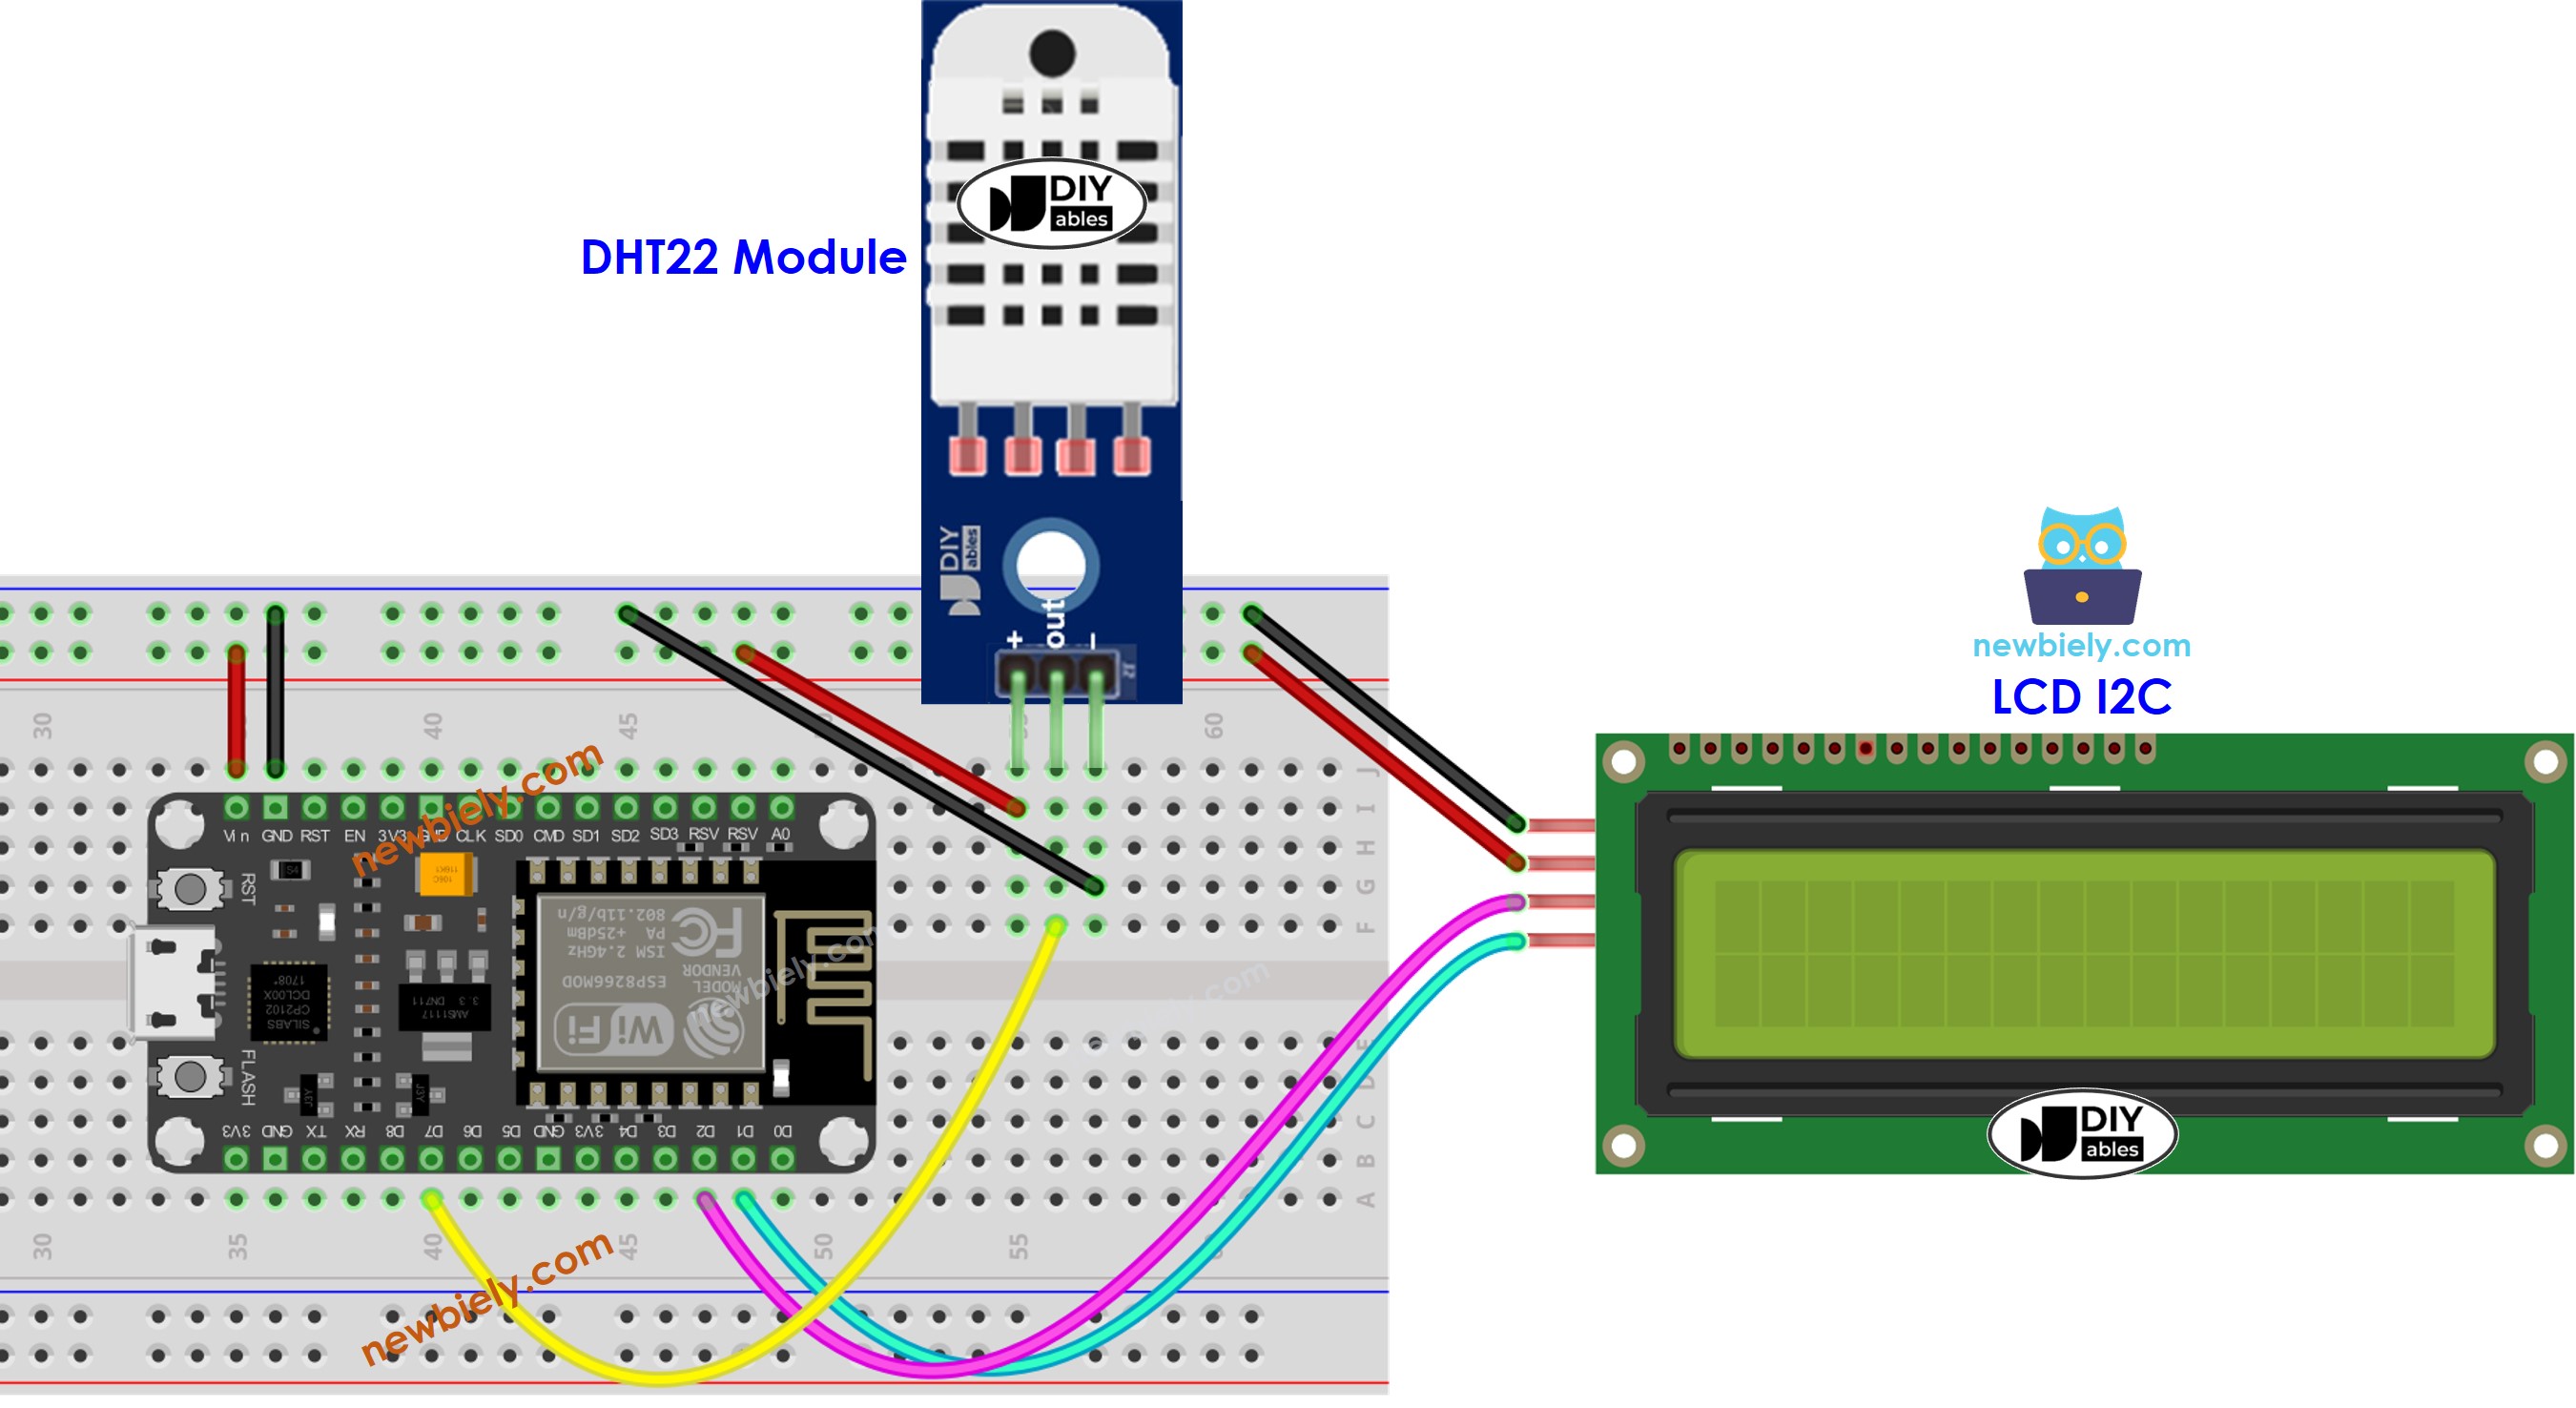 The wiring diagram between ESP8266 NodeMCU and DHT22 temperature and humidity LCD